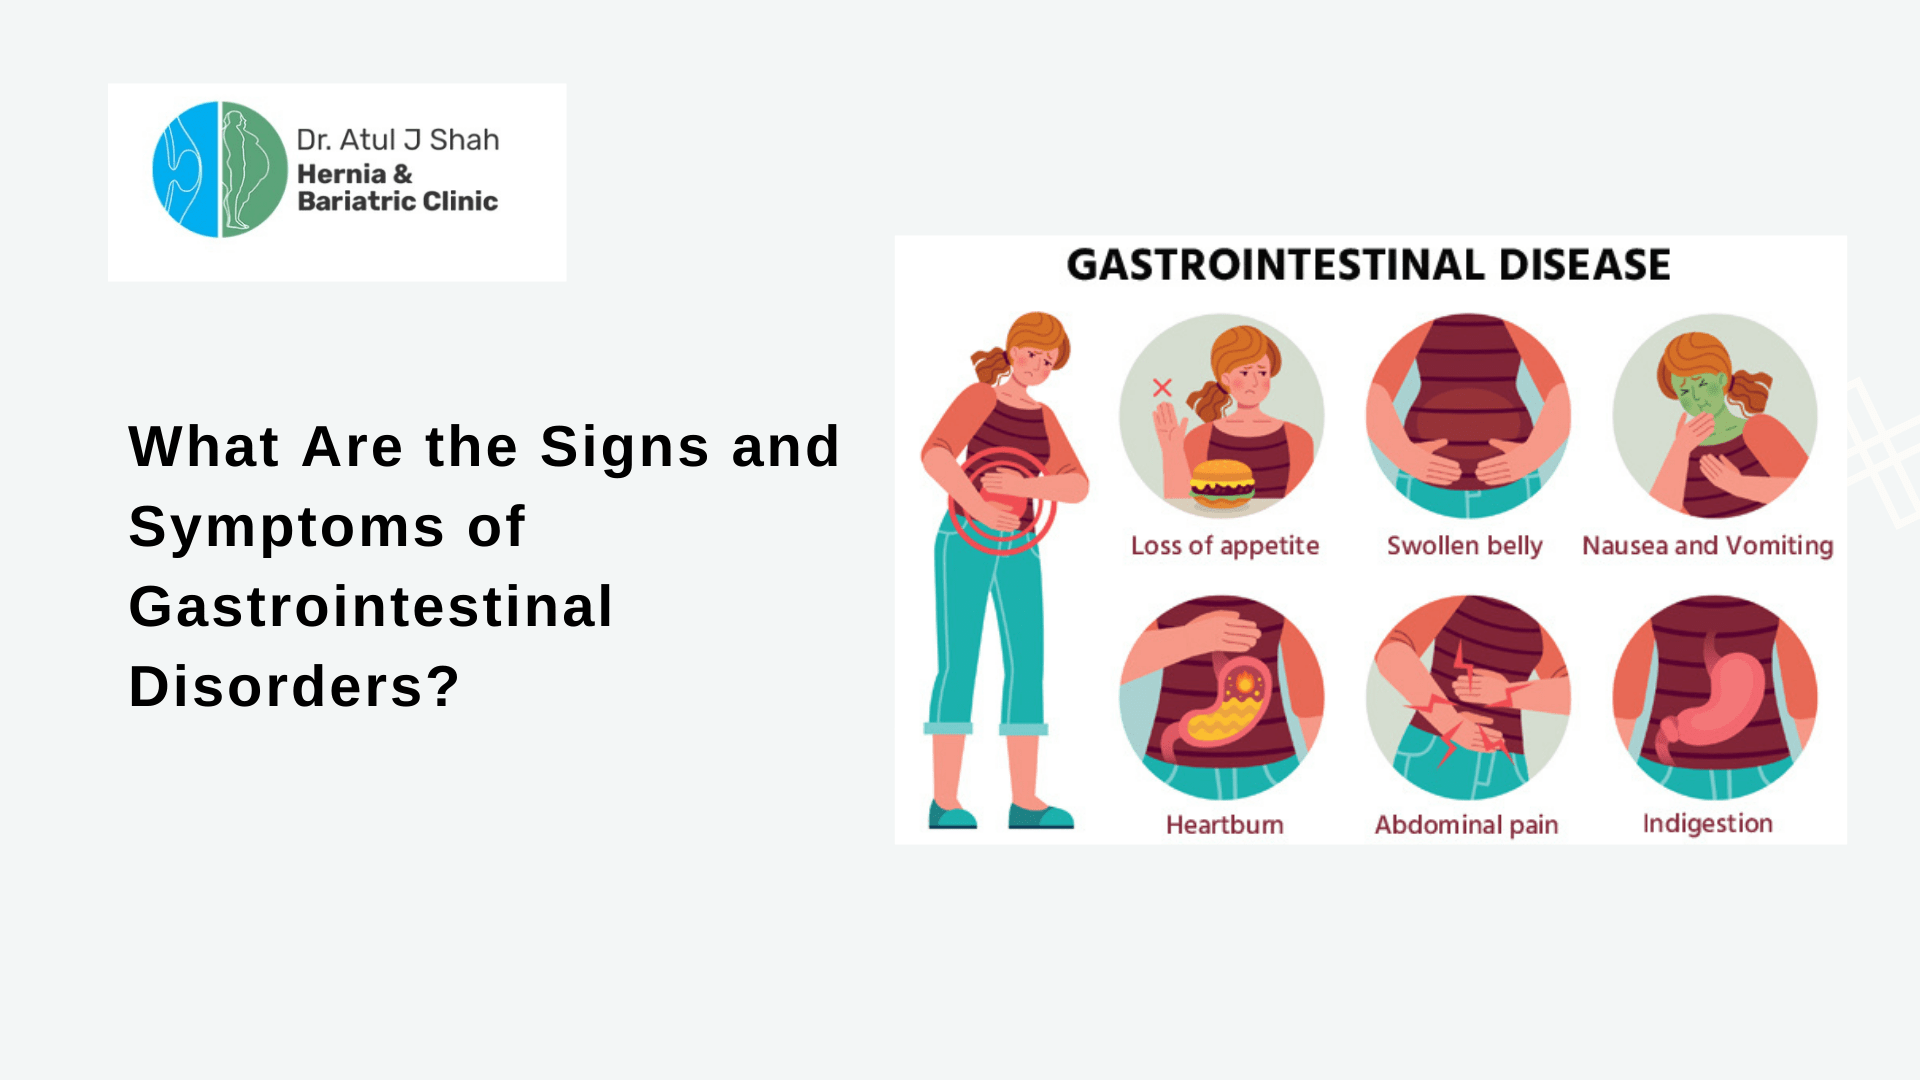 What Are the Signs and Symptoms of Gastrointestinal Disorders?